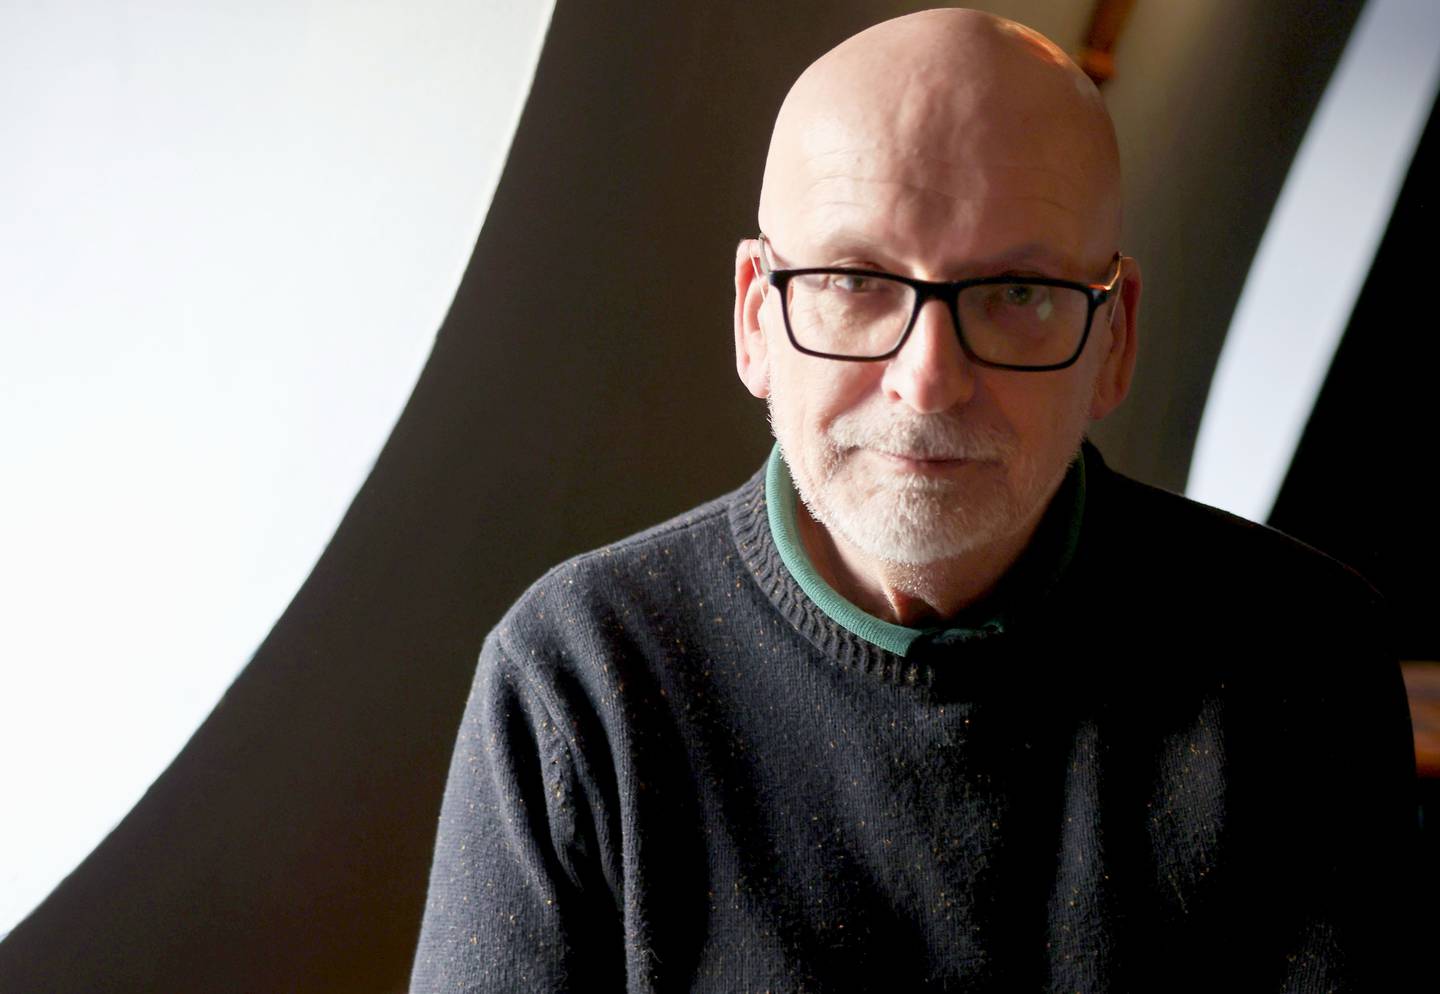 Roddy Doyle, who has a new version of Peter Pan, at the Gate Theatre, Dublin.
Photograph: Dara Mac Dónaill/The Irish Times